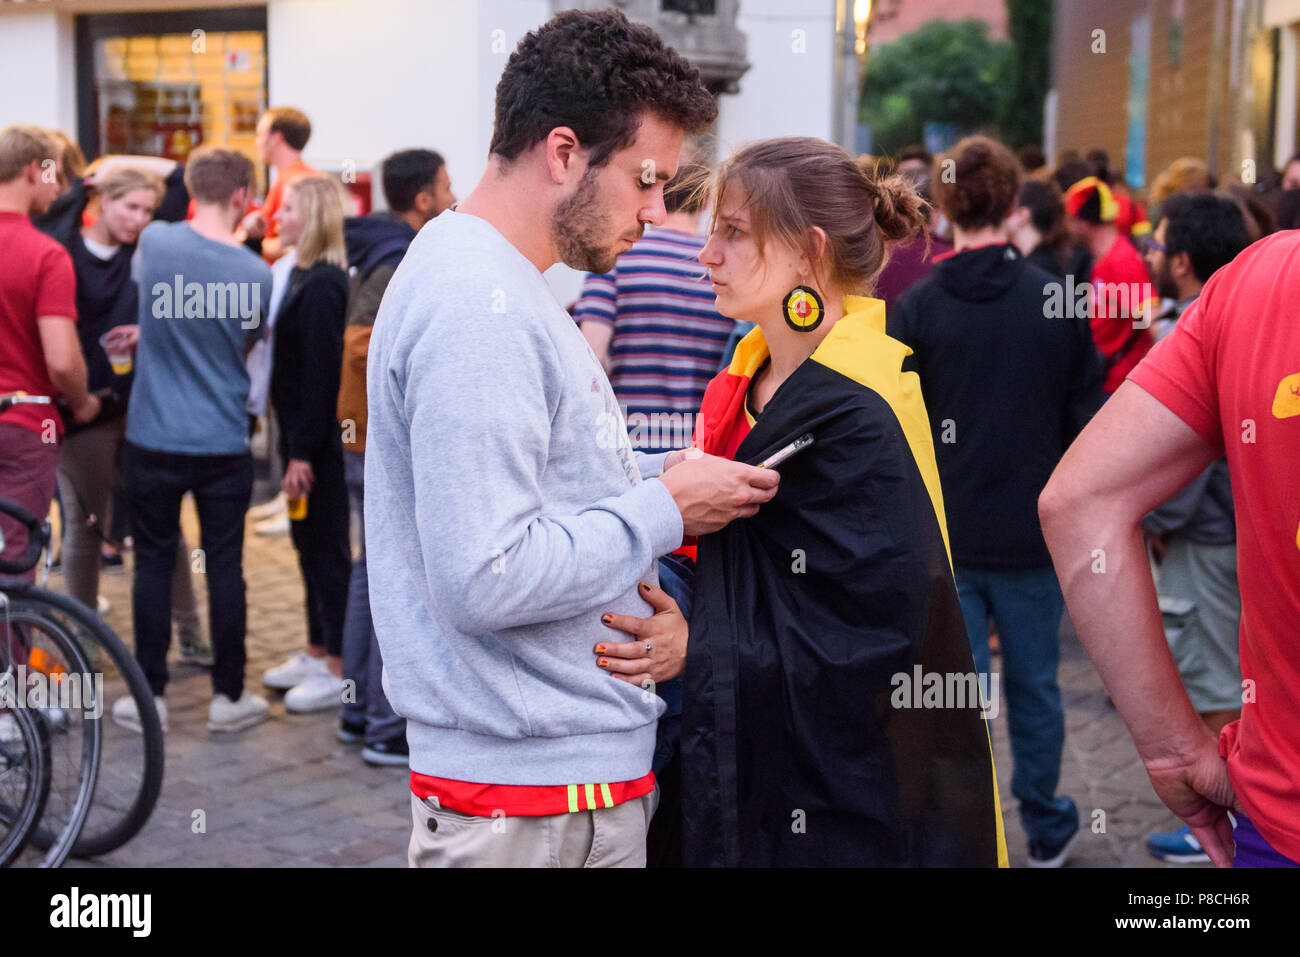 10.07.2018. BRUSSELS, BELGIUM. Football fans of Belgium and France after FIFA WORLD CUP 2018 game between team Belgium and team France. Stock Photo